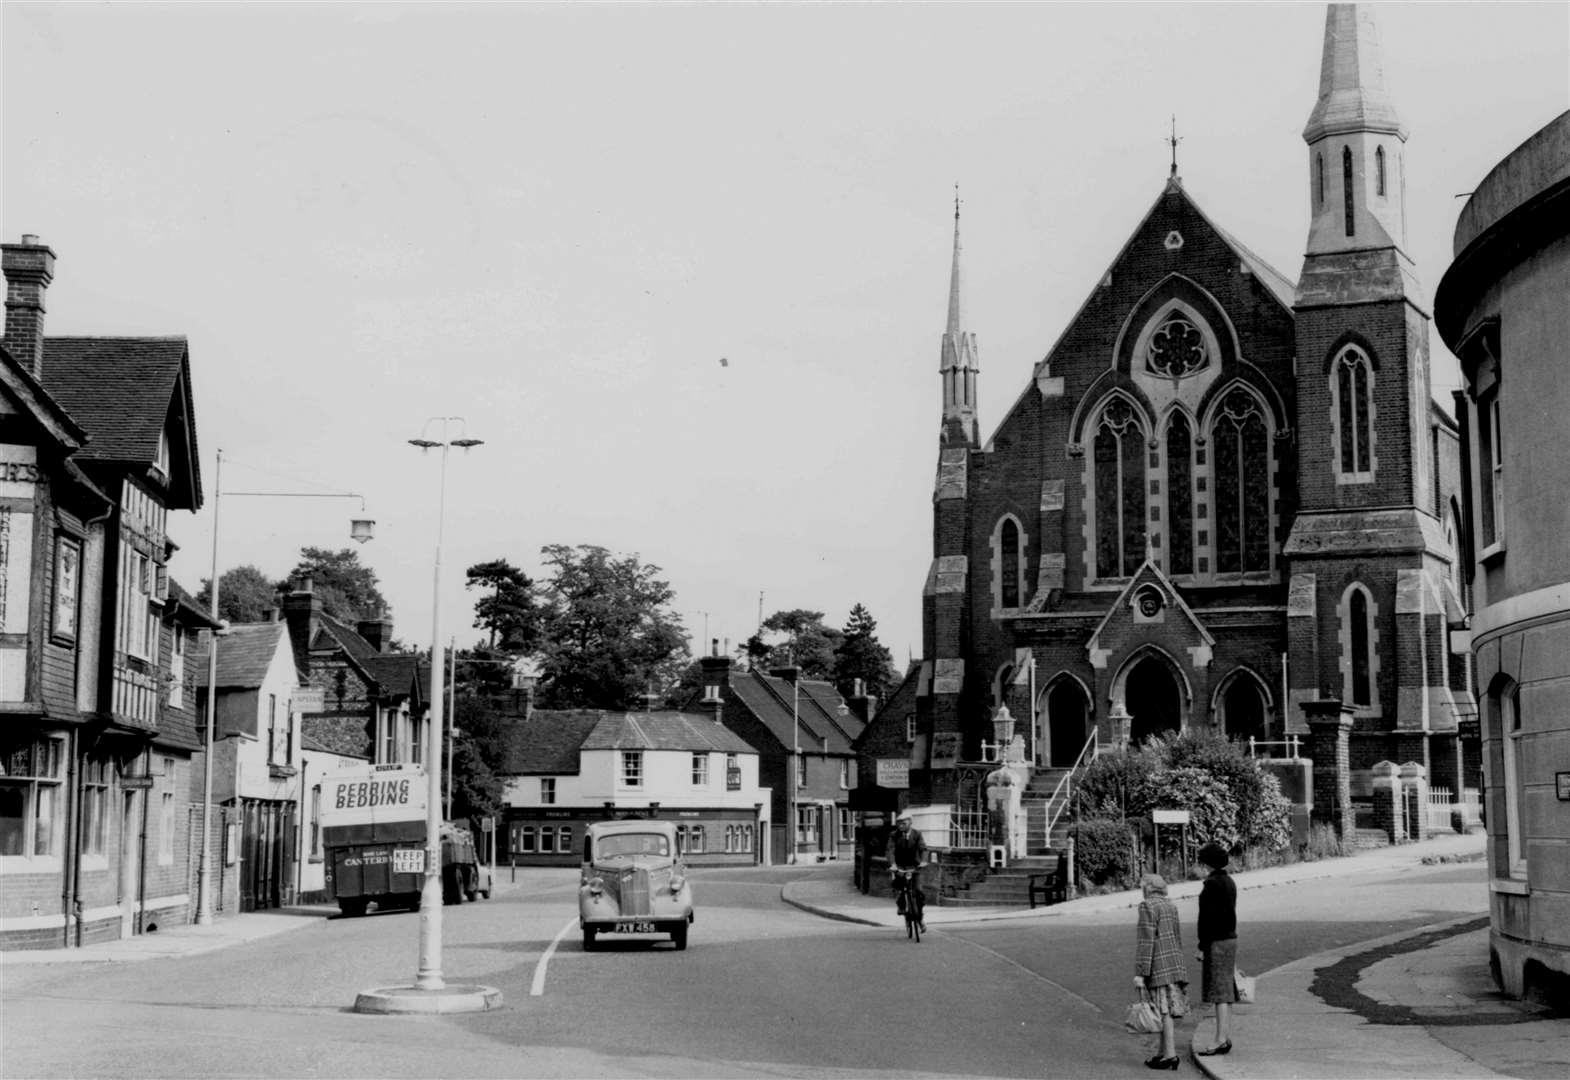 This view of Wincheap Green, Canterbury, from autumn 1961 looks along Pin Hill from where Wincheap roundabout is today. The Castle Hotel (left) was pulled down in 1963 and most of the buildings from left to centre were demolished to make way for the ring-road within a few years. St Andrew's Presbyterian Church was pulled down in 1973